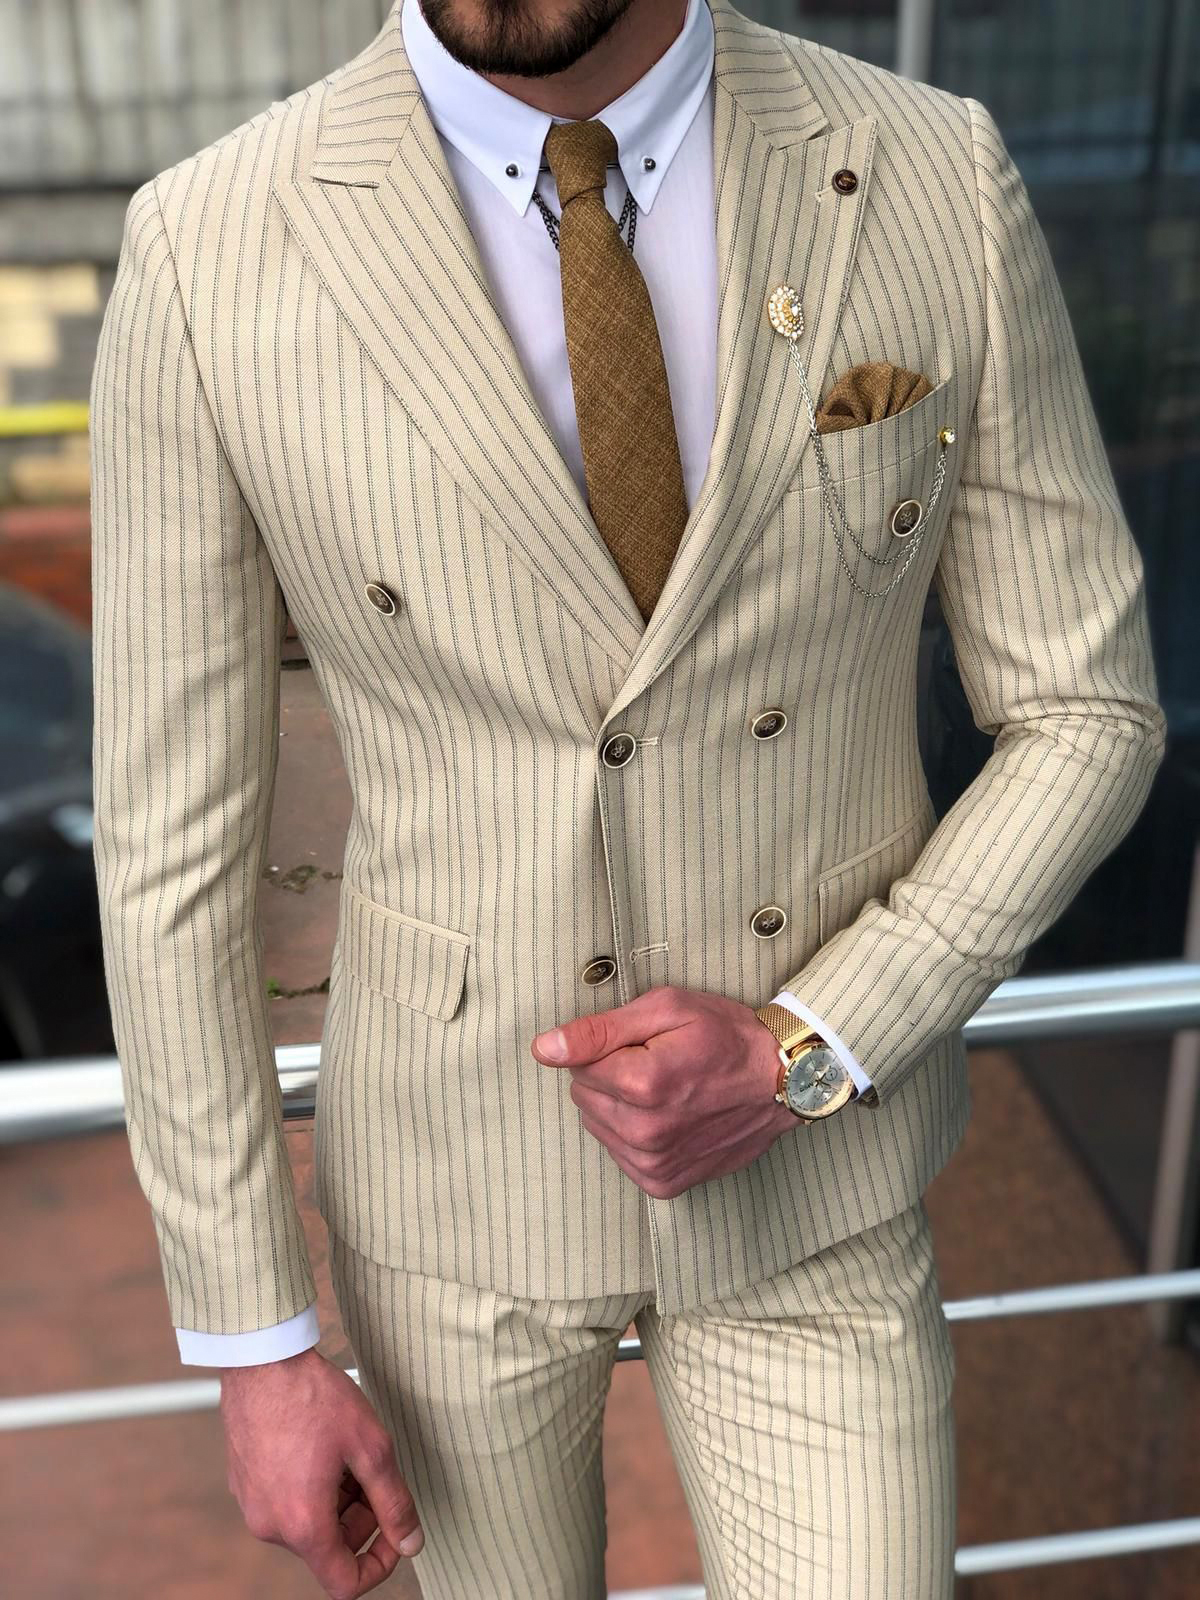 wearing beige pinstripe suit with a white dress shirt and bronze tie